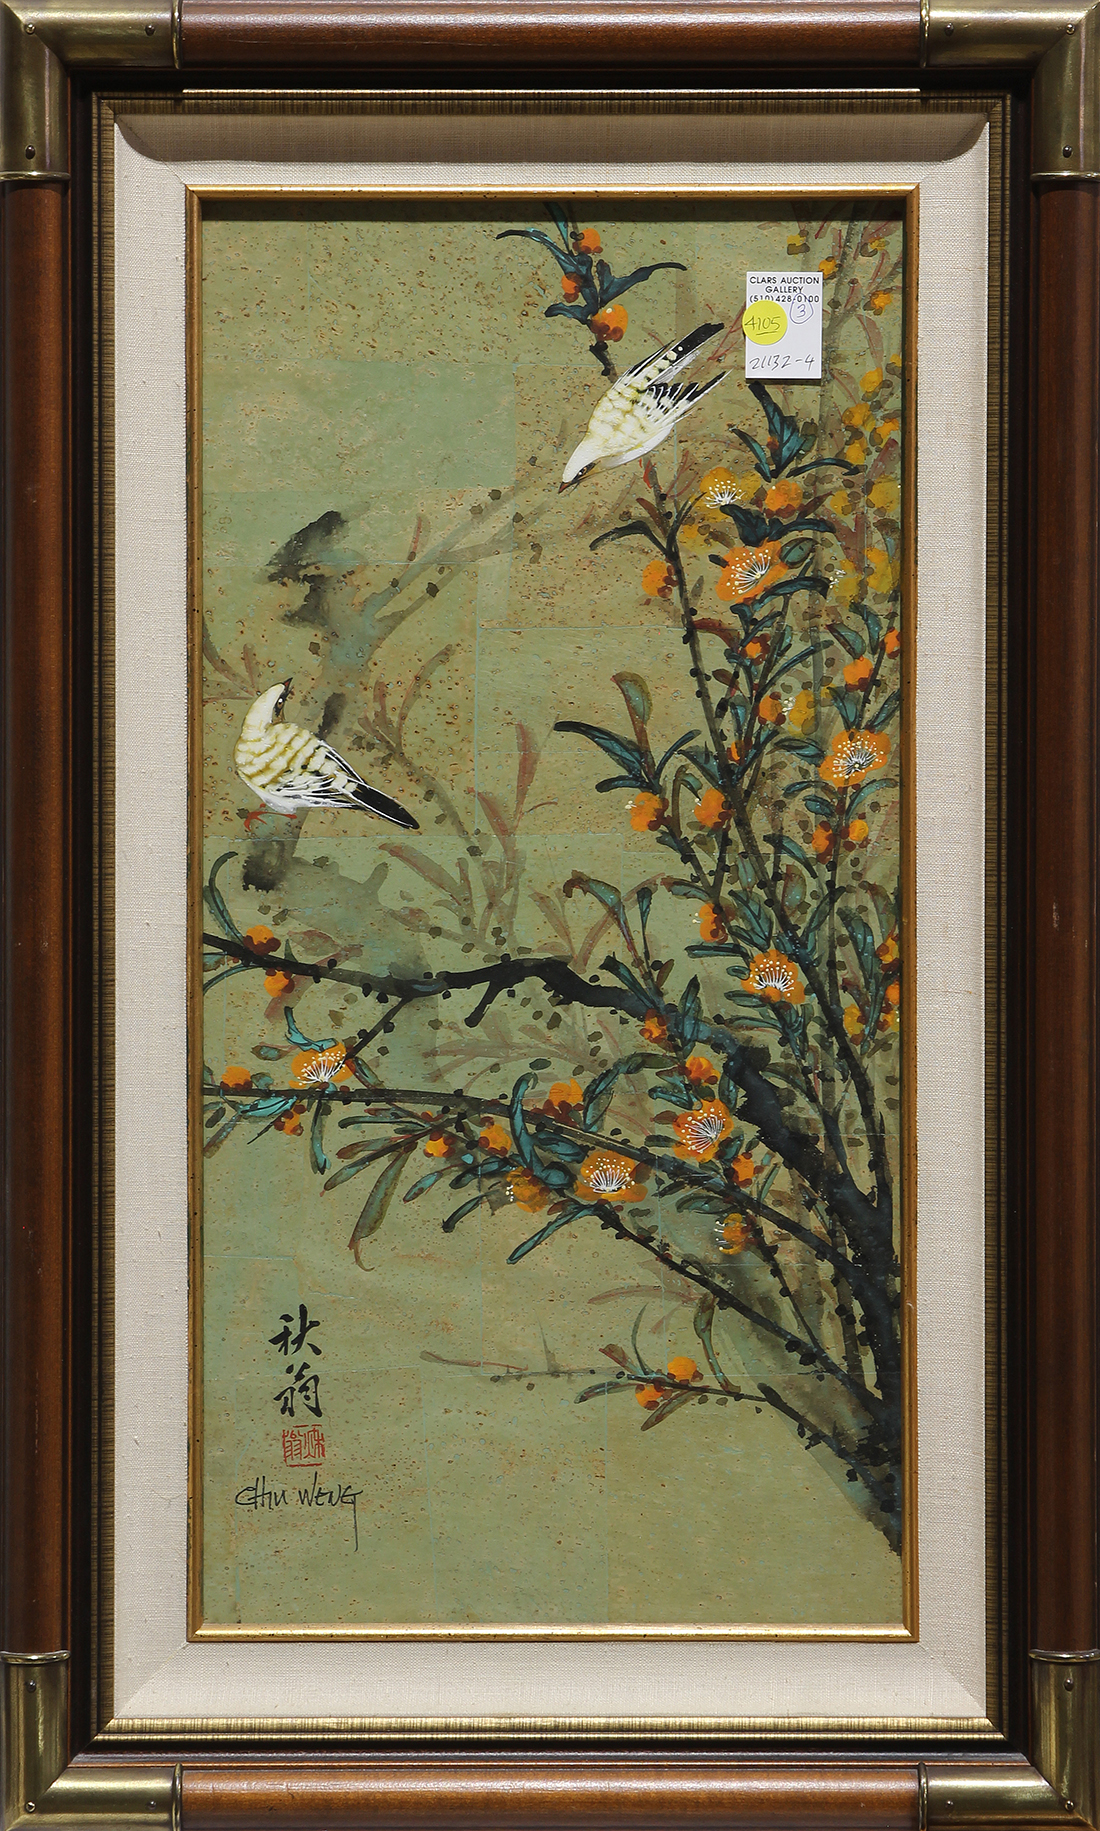 (lot of 3) Chiu Weng (Chinese, 20th century), Birds and Flowers, ink and color on paper, each signed - Image 3 of 5